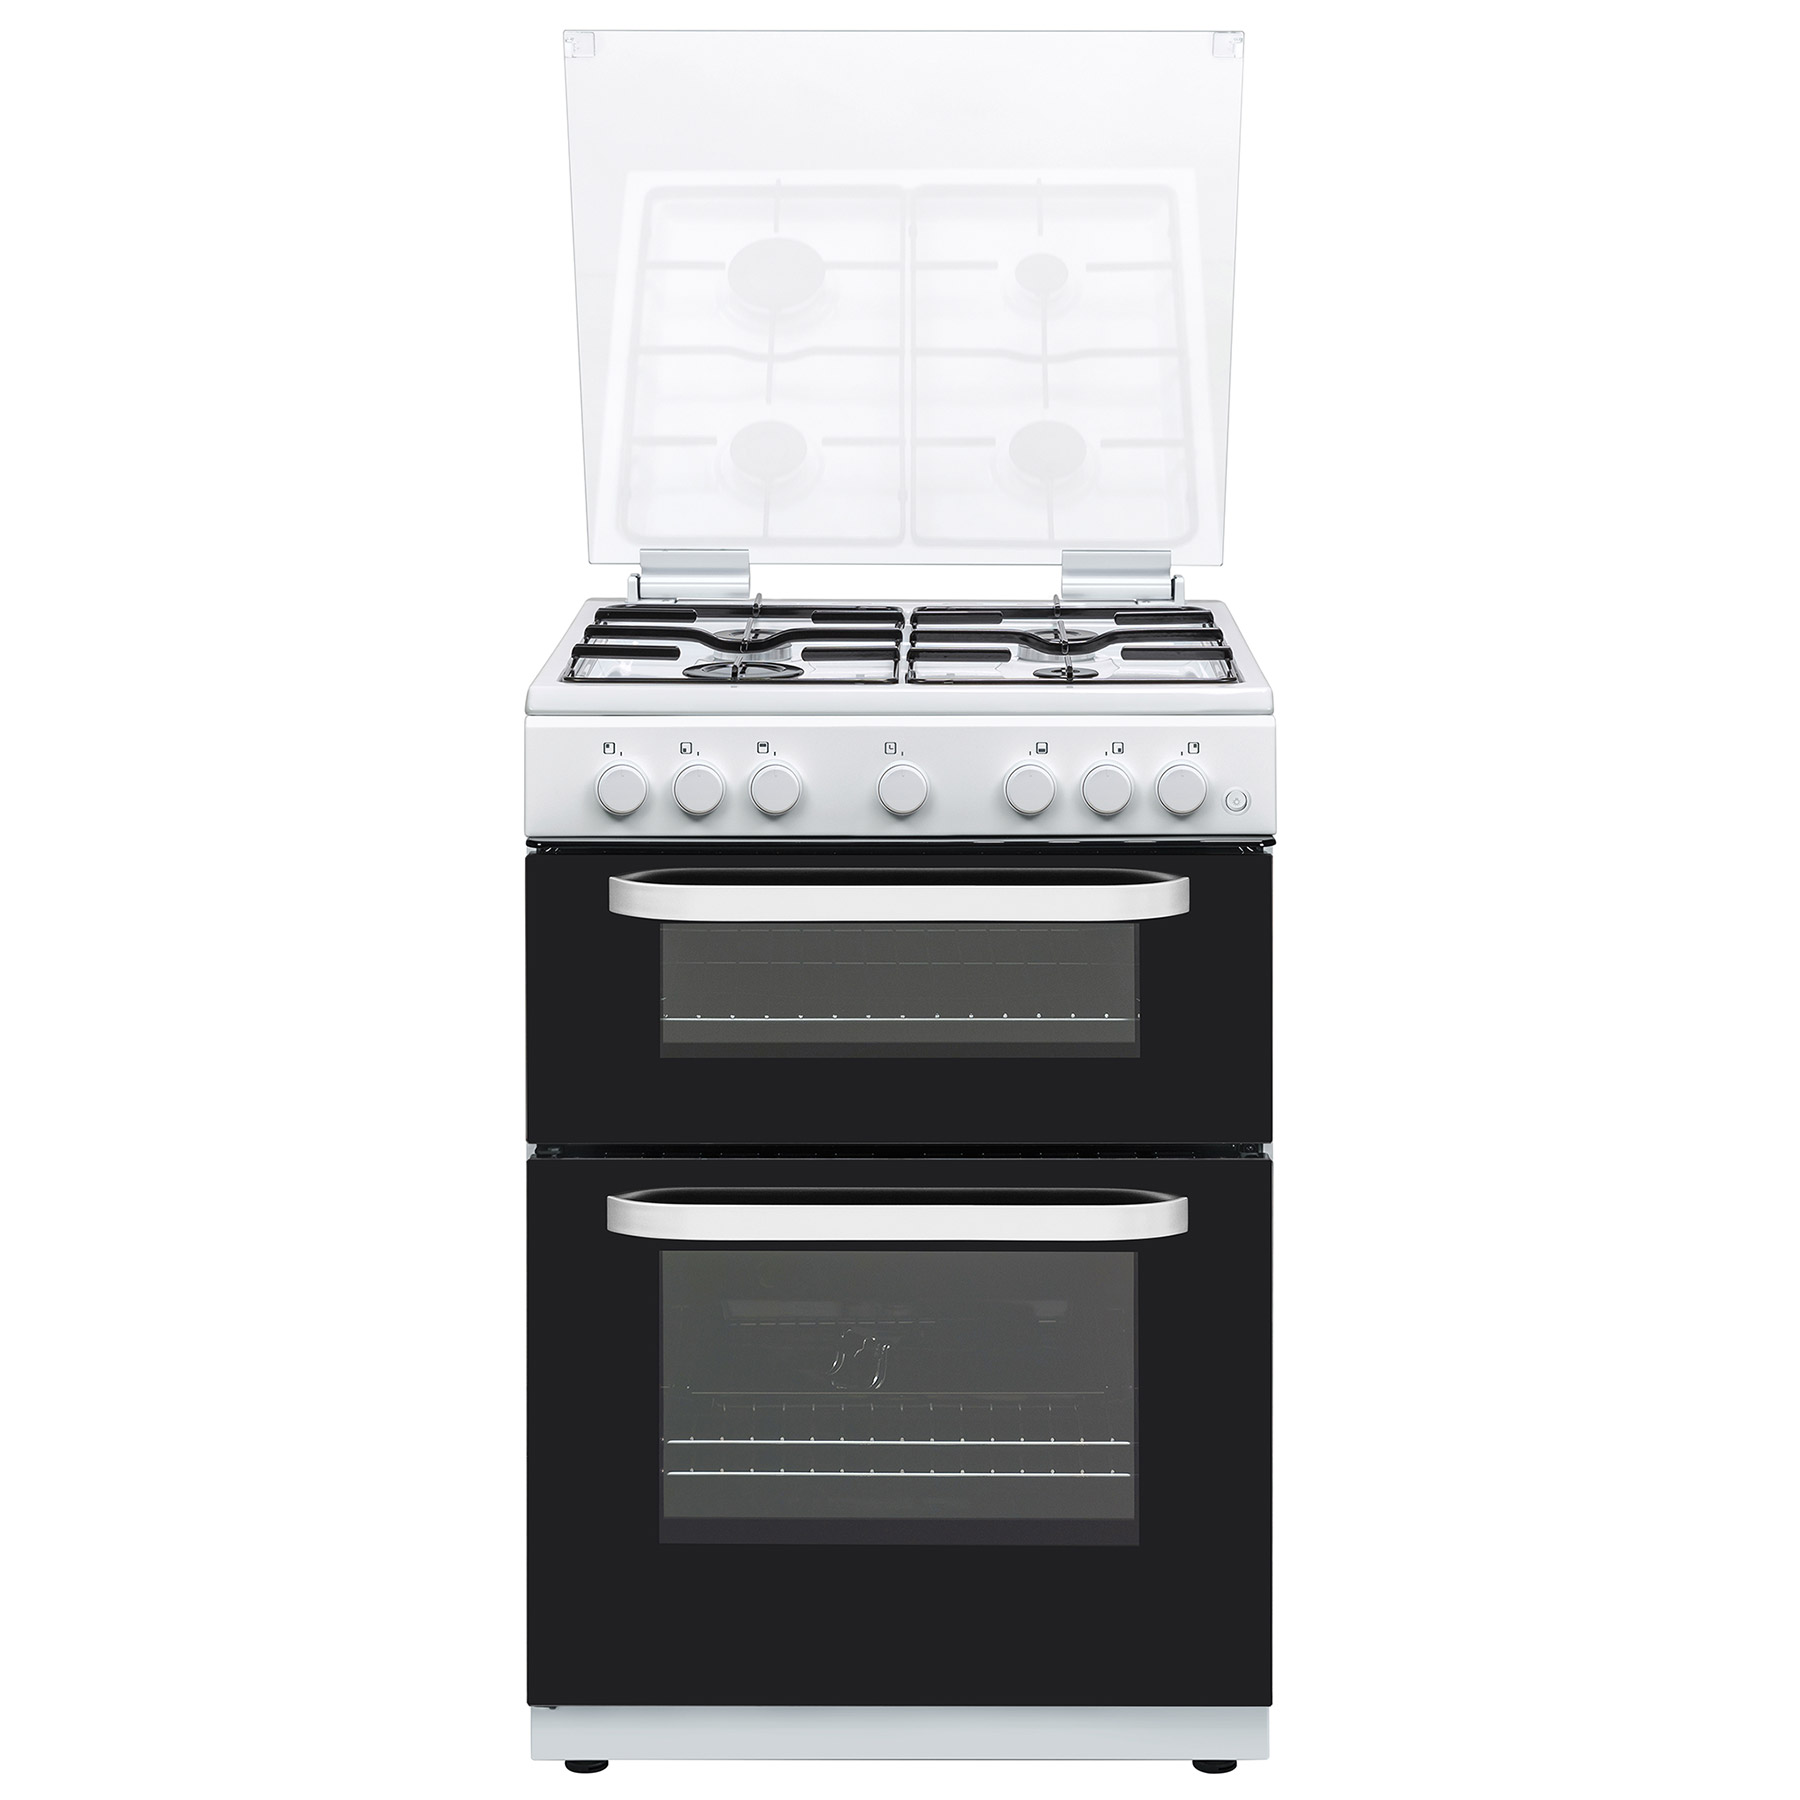 Image of Hostess DOG60W 60cm Double Oven Gas Cooker in White Glass Lid 25 71L